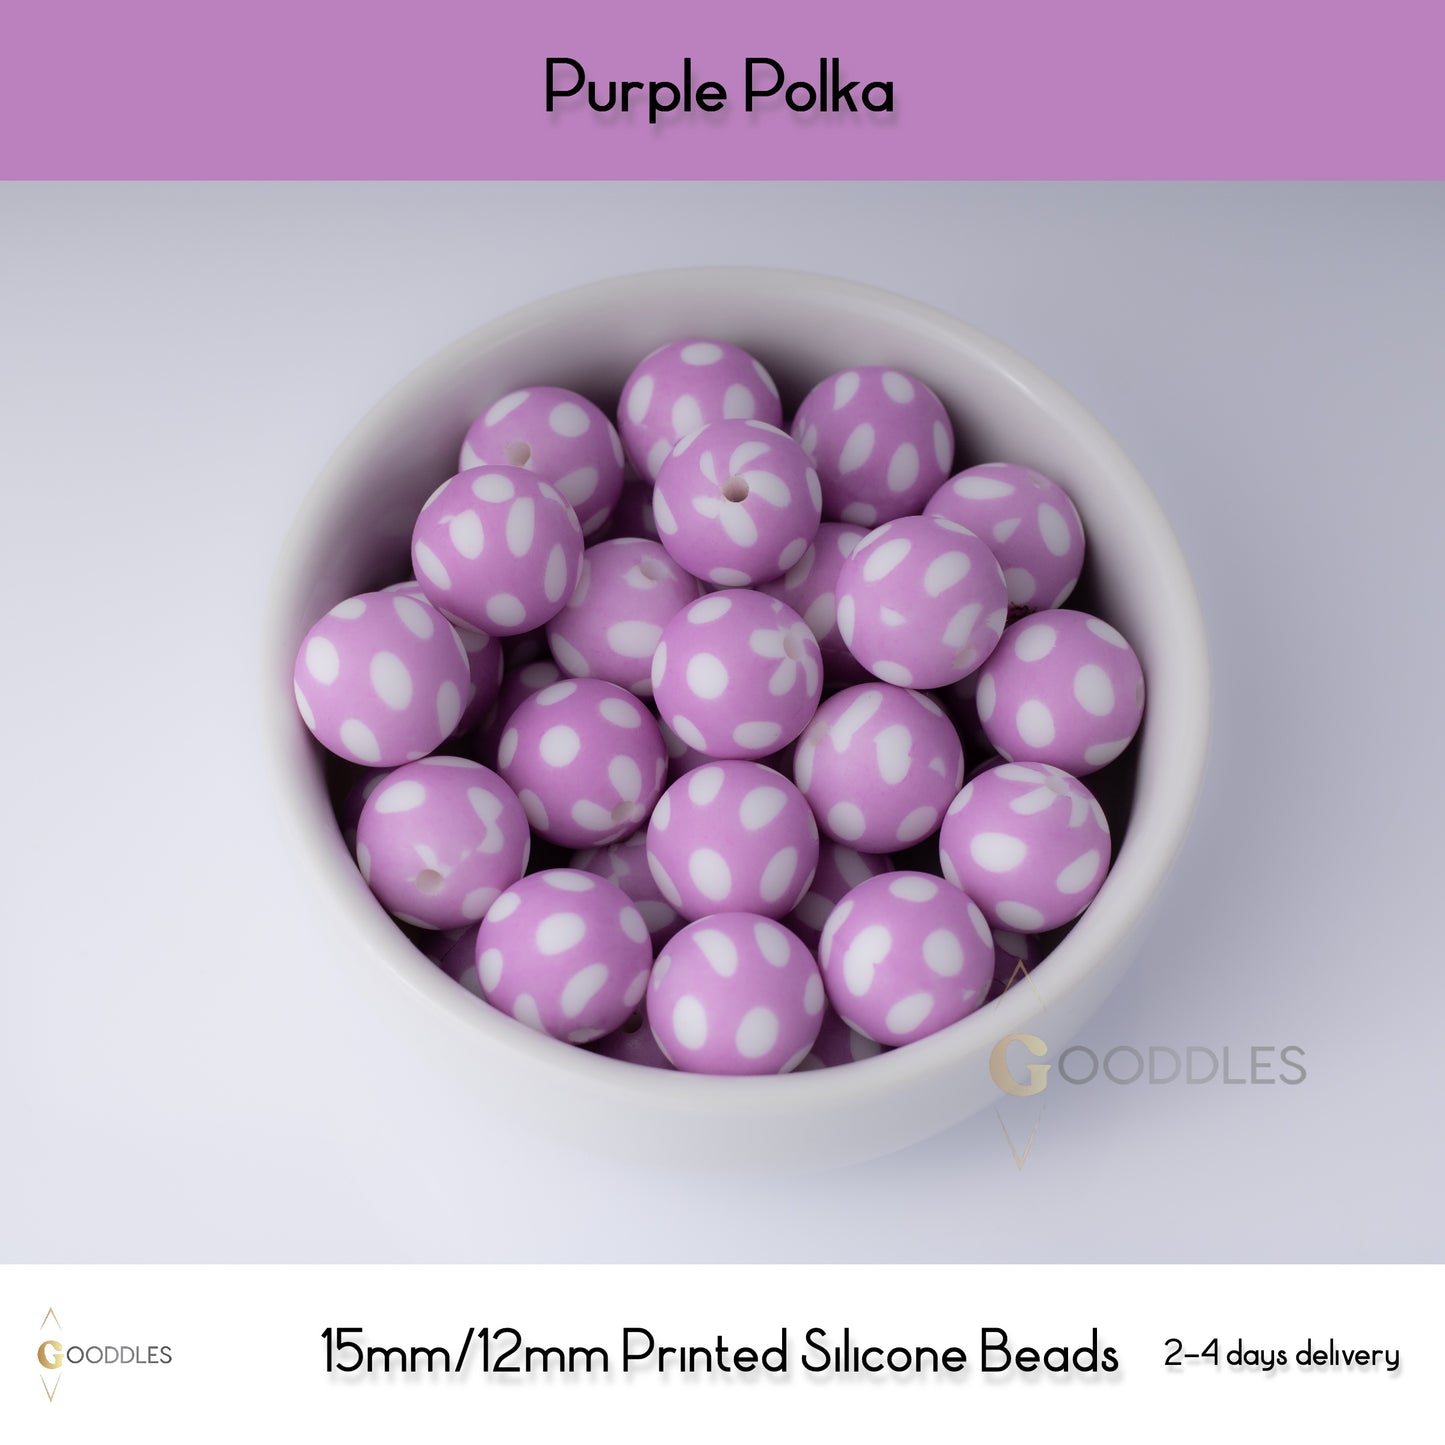 5pcs, Purple Polka Silicone Beads Printed Round Silicone Beads